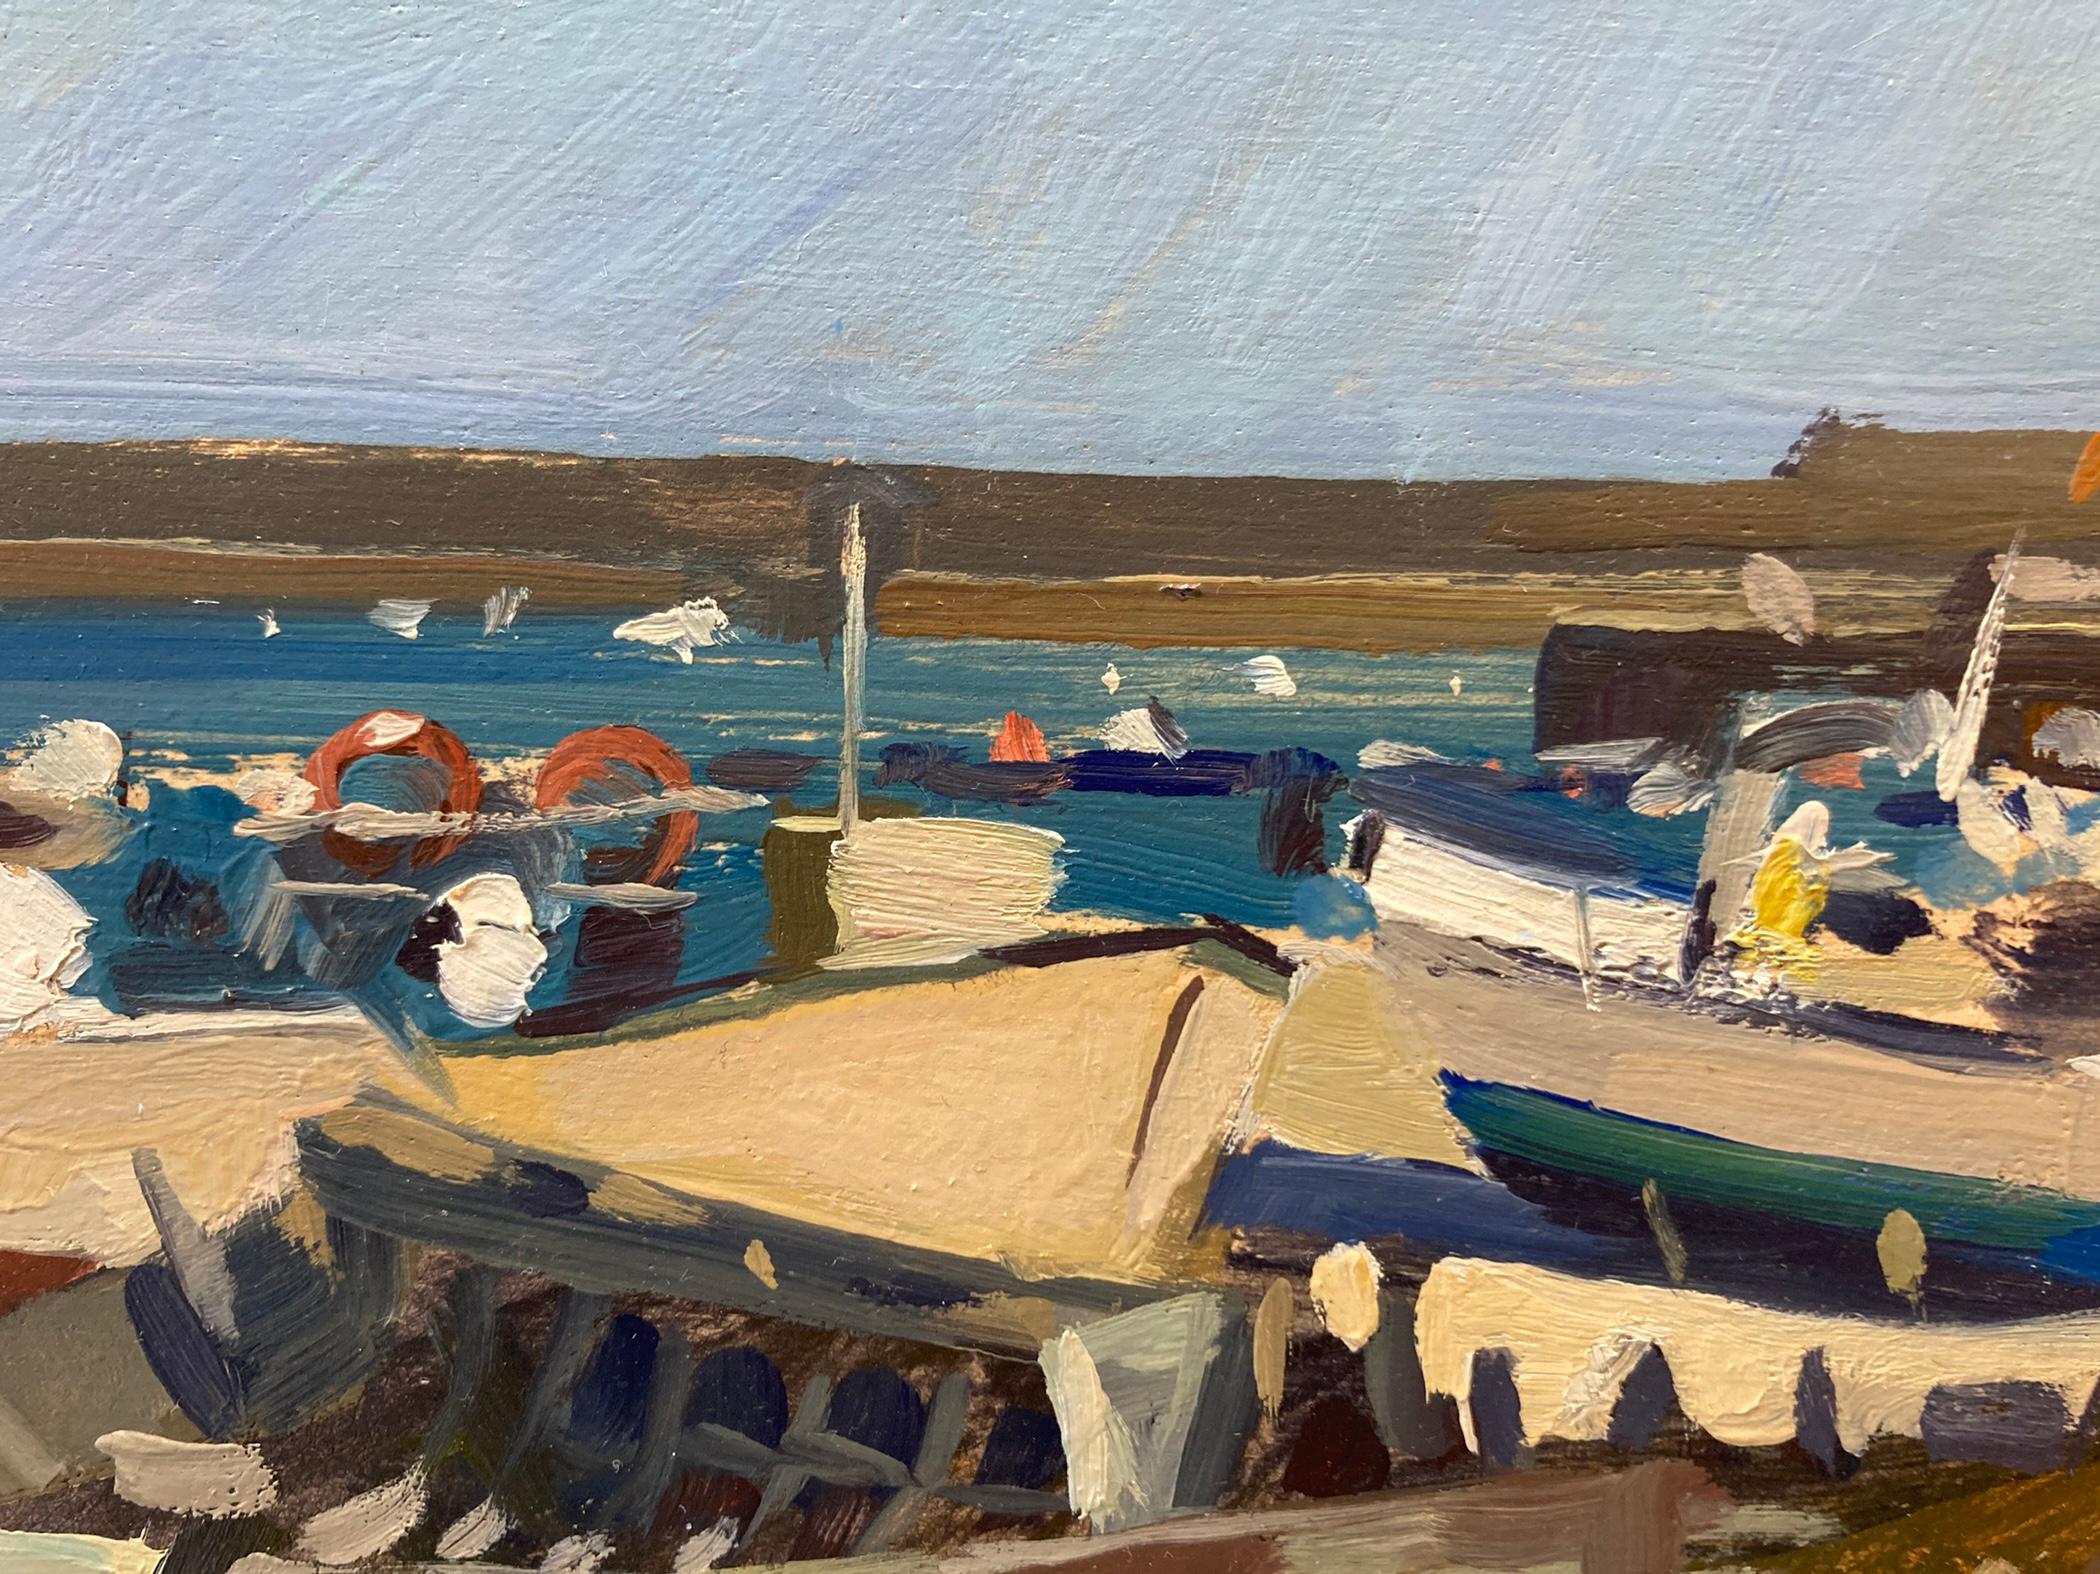 Dalessio's plein air painting depicts a group of boats on the beach of Sarges port with the breakwater in the distance. 

Framed dimensions: 13.5 x 17.5 inches

Artist Bio:
Marc Dalessio was born in 1972 in Los Angeles, California. Even in his